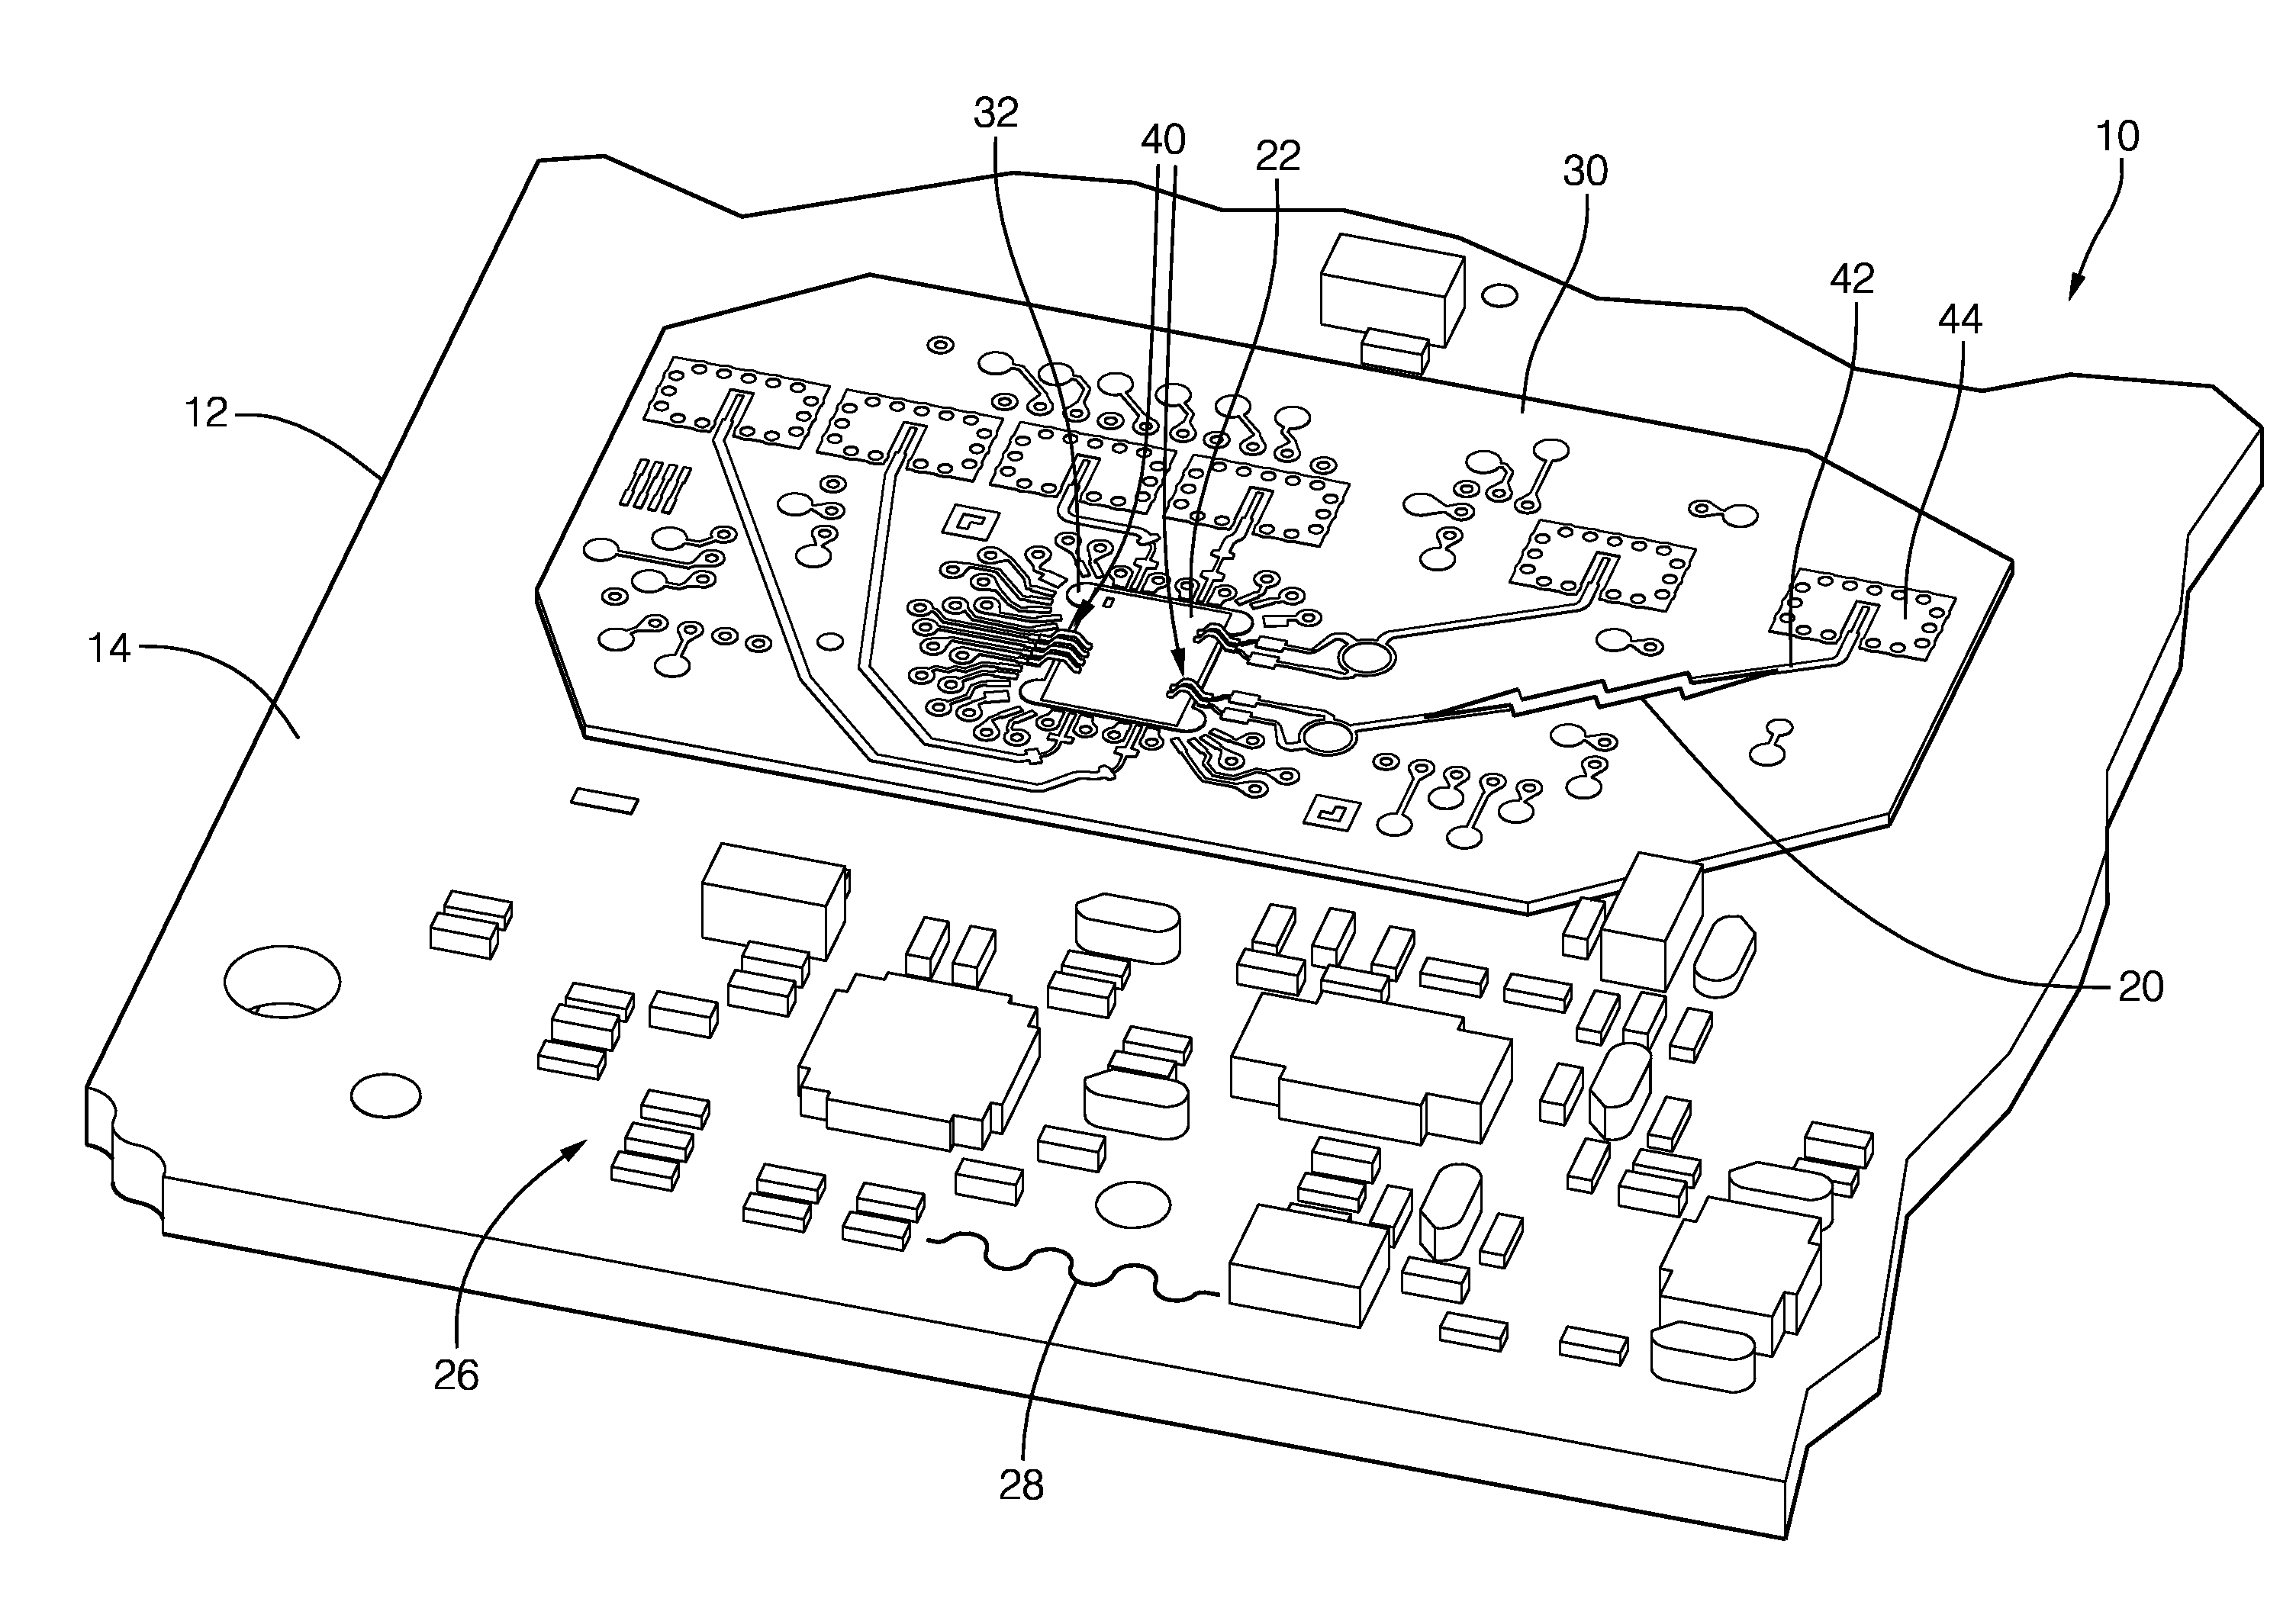 Circuit board assembly with high and low frequency substrates